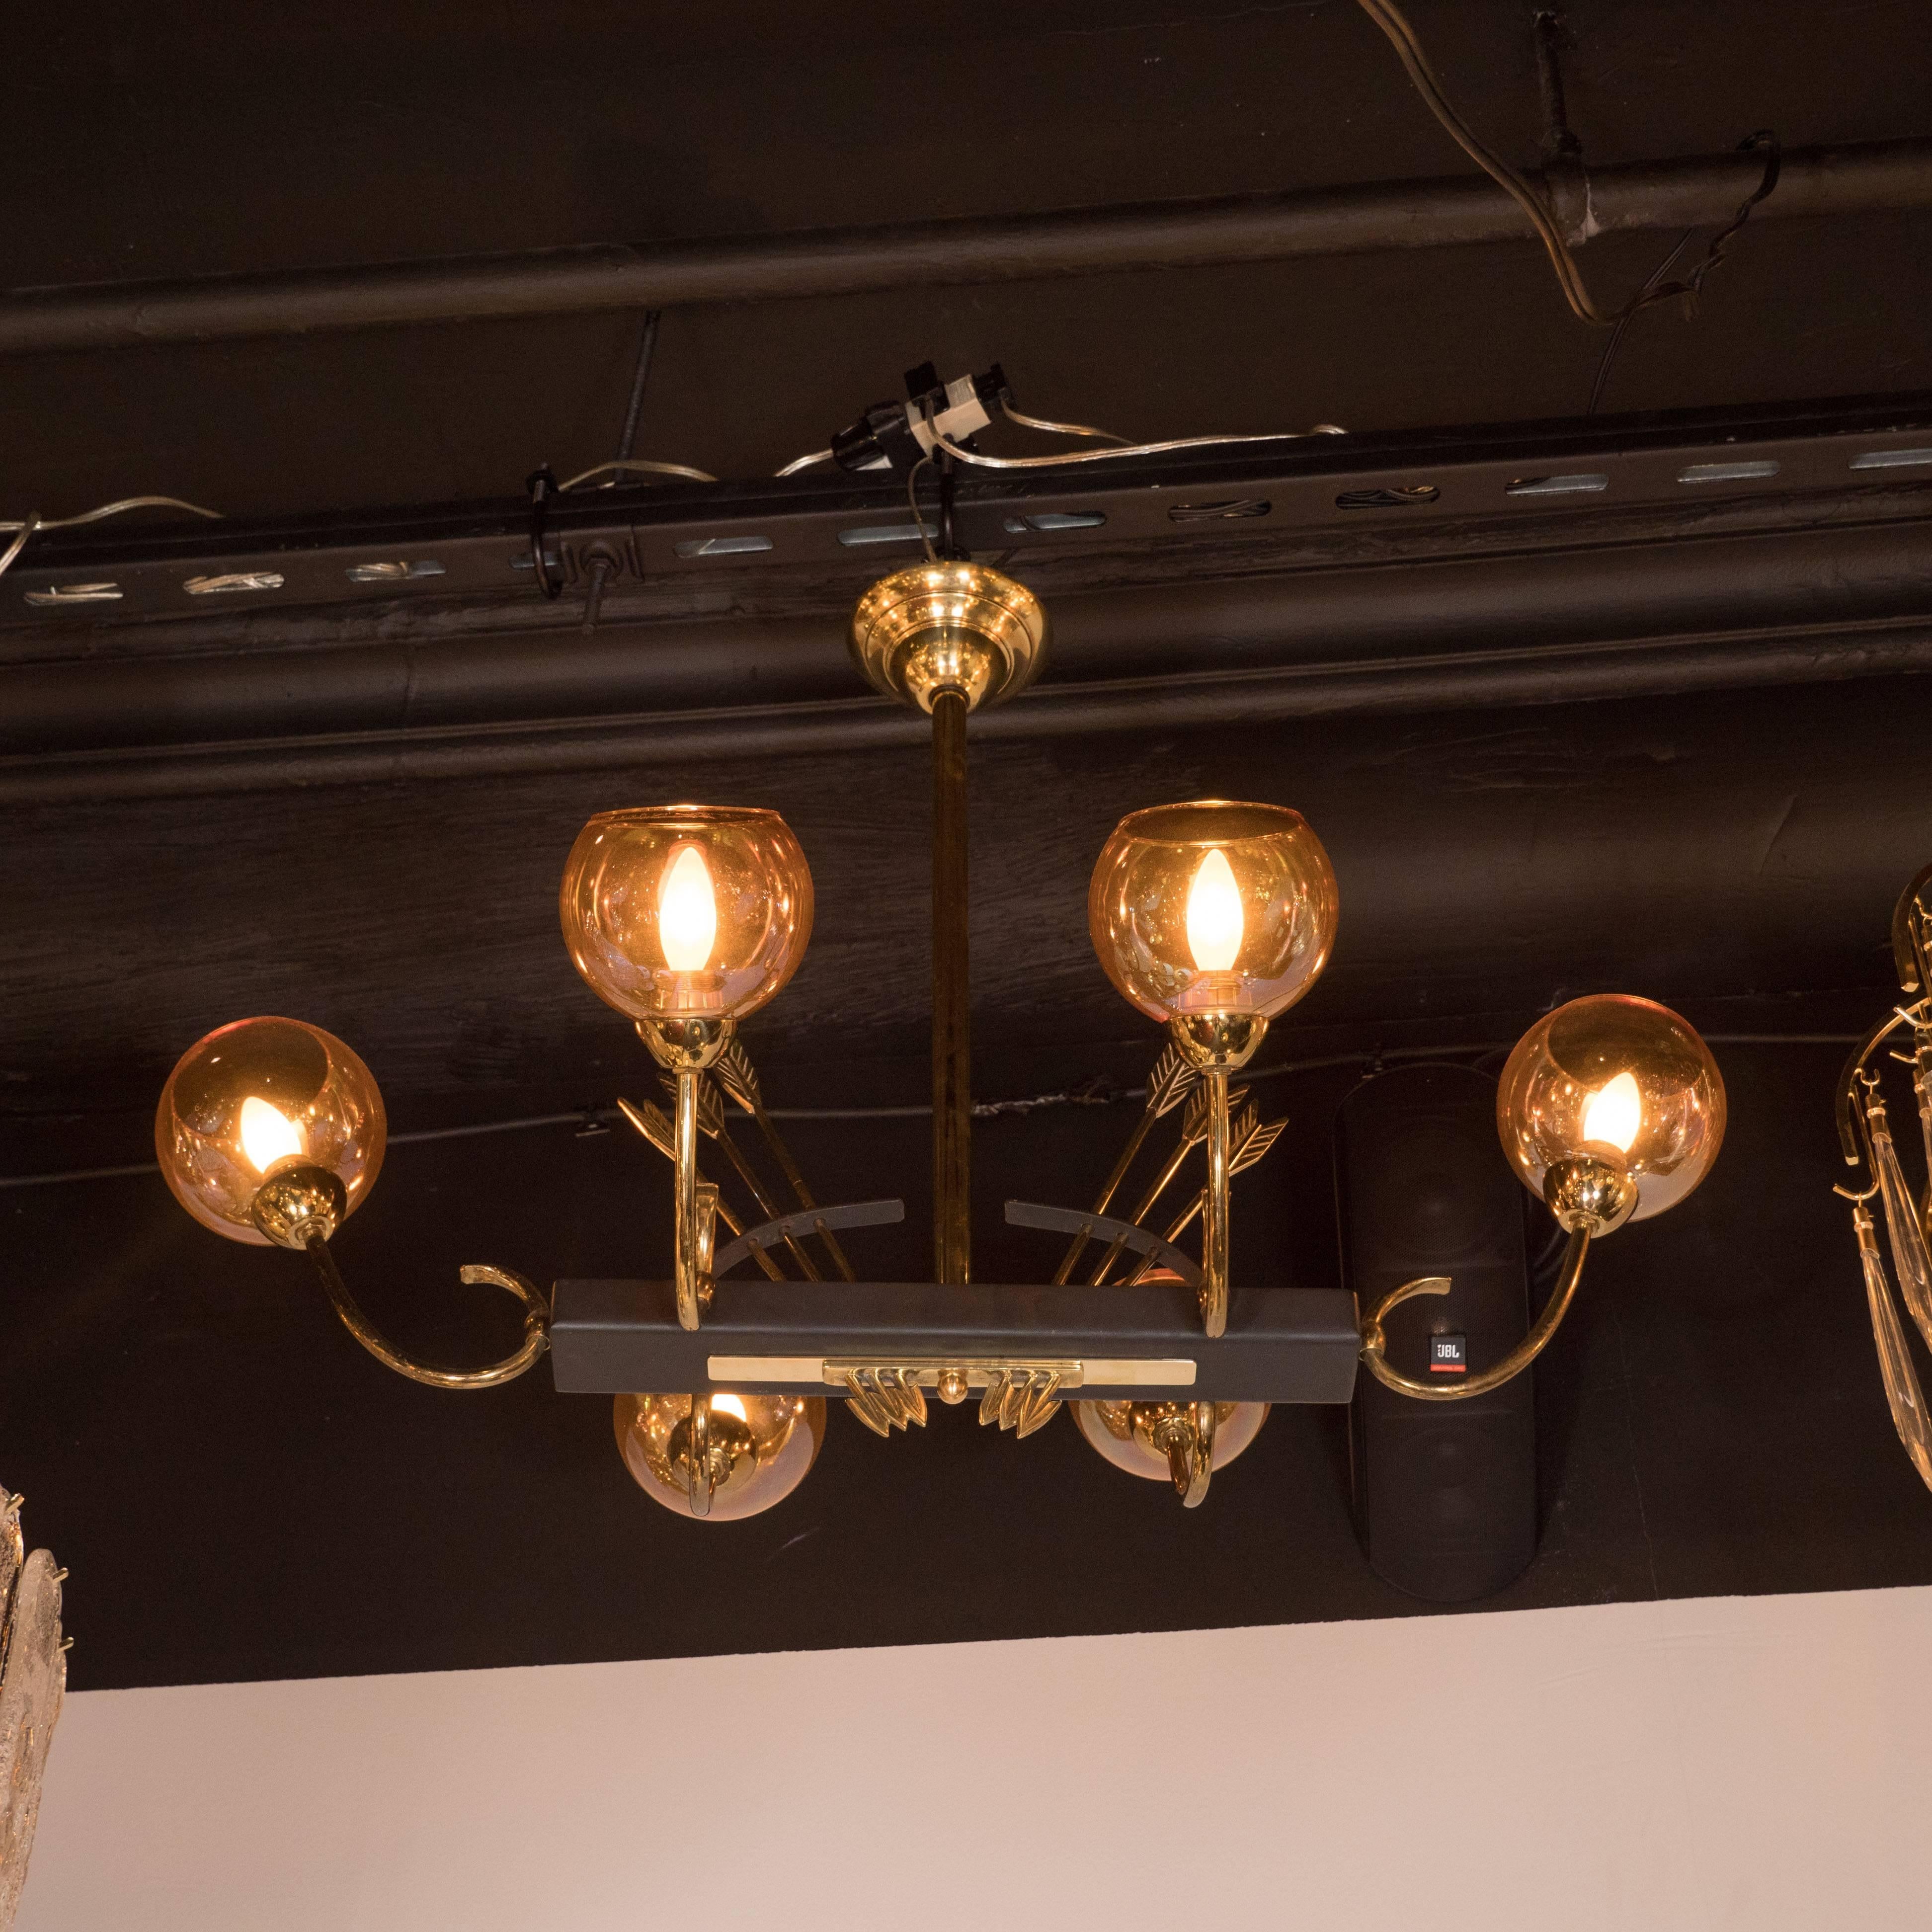 This stunning French Directoire style chandelier features two sets of inverted arrows realized in brass with notched quills piece through a rectangular piece of ebonized walnut. The six arrow heads, also in brass, appear on the other side of the